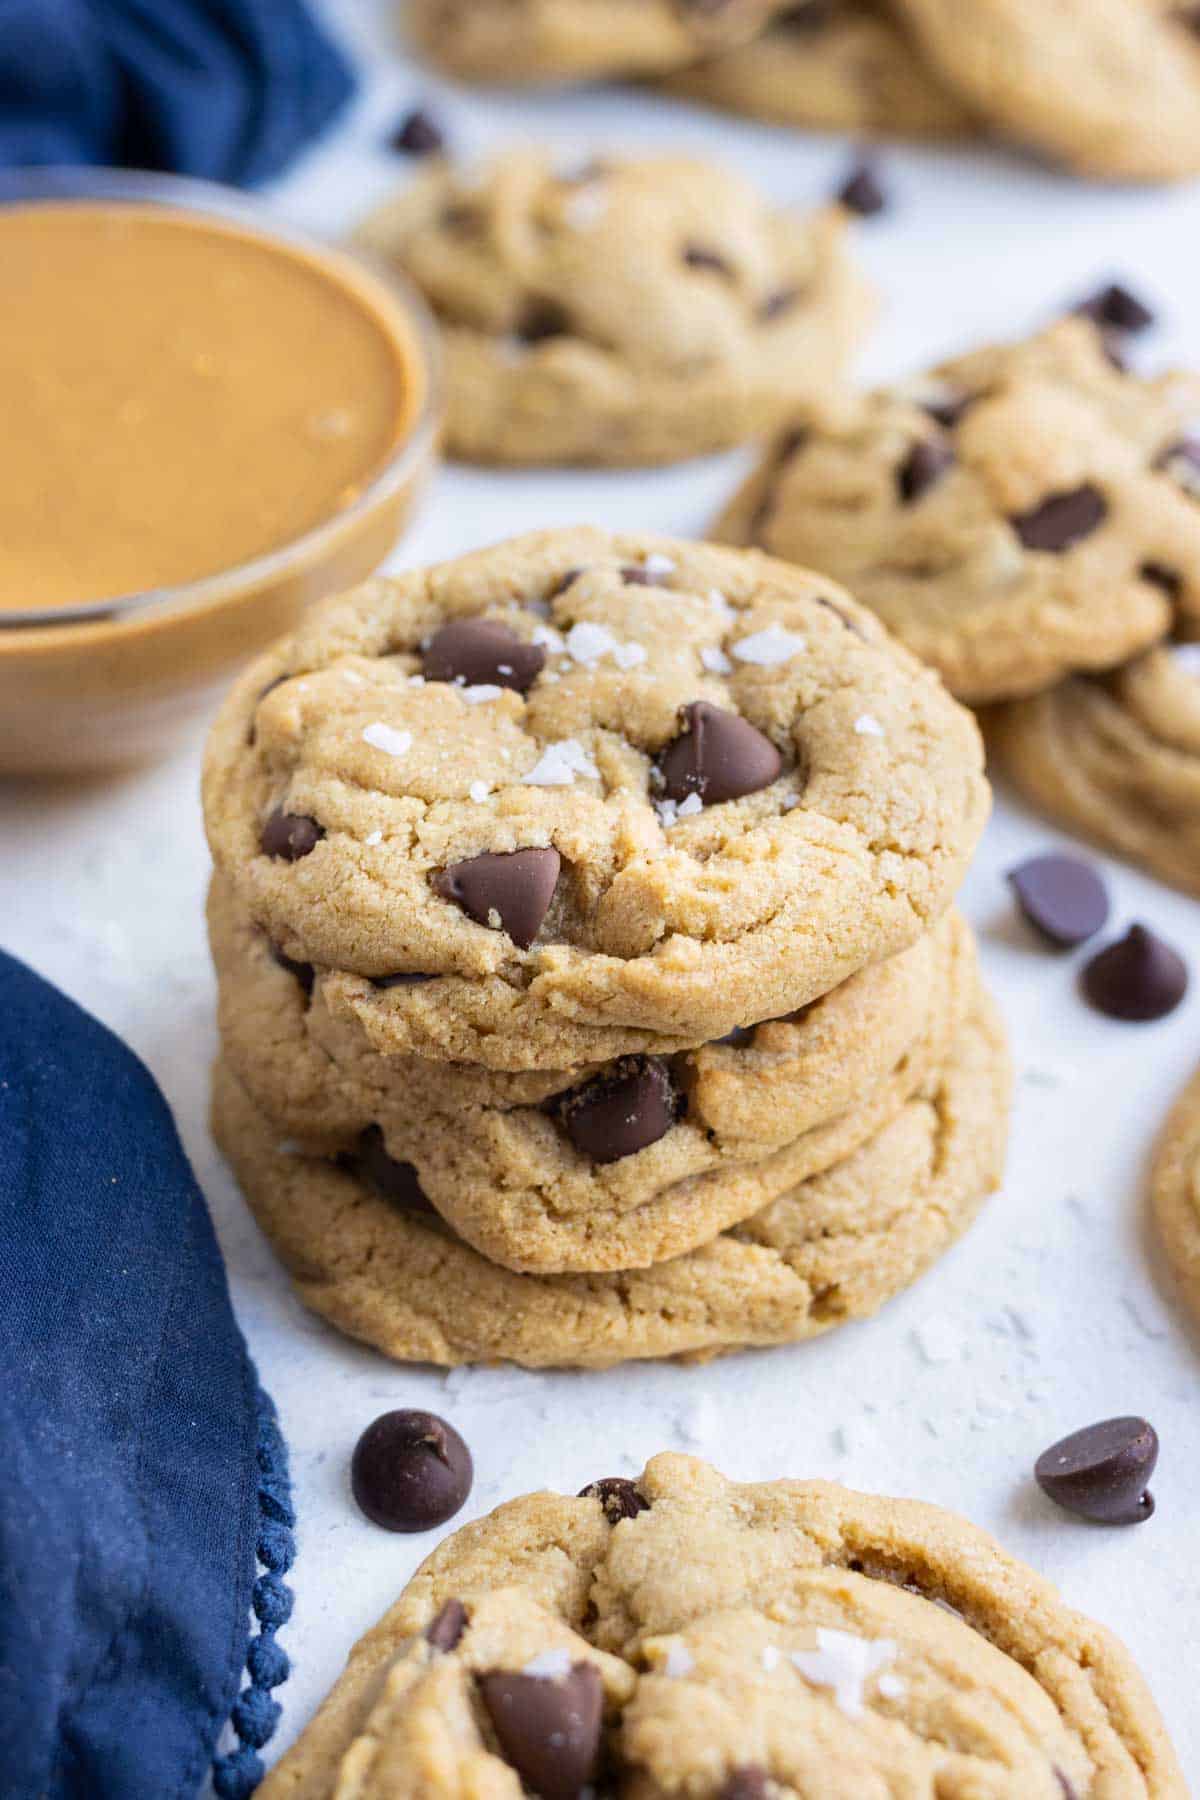 These peanut butter chocolate chip cookies are a delicious treat.